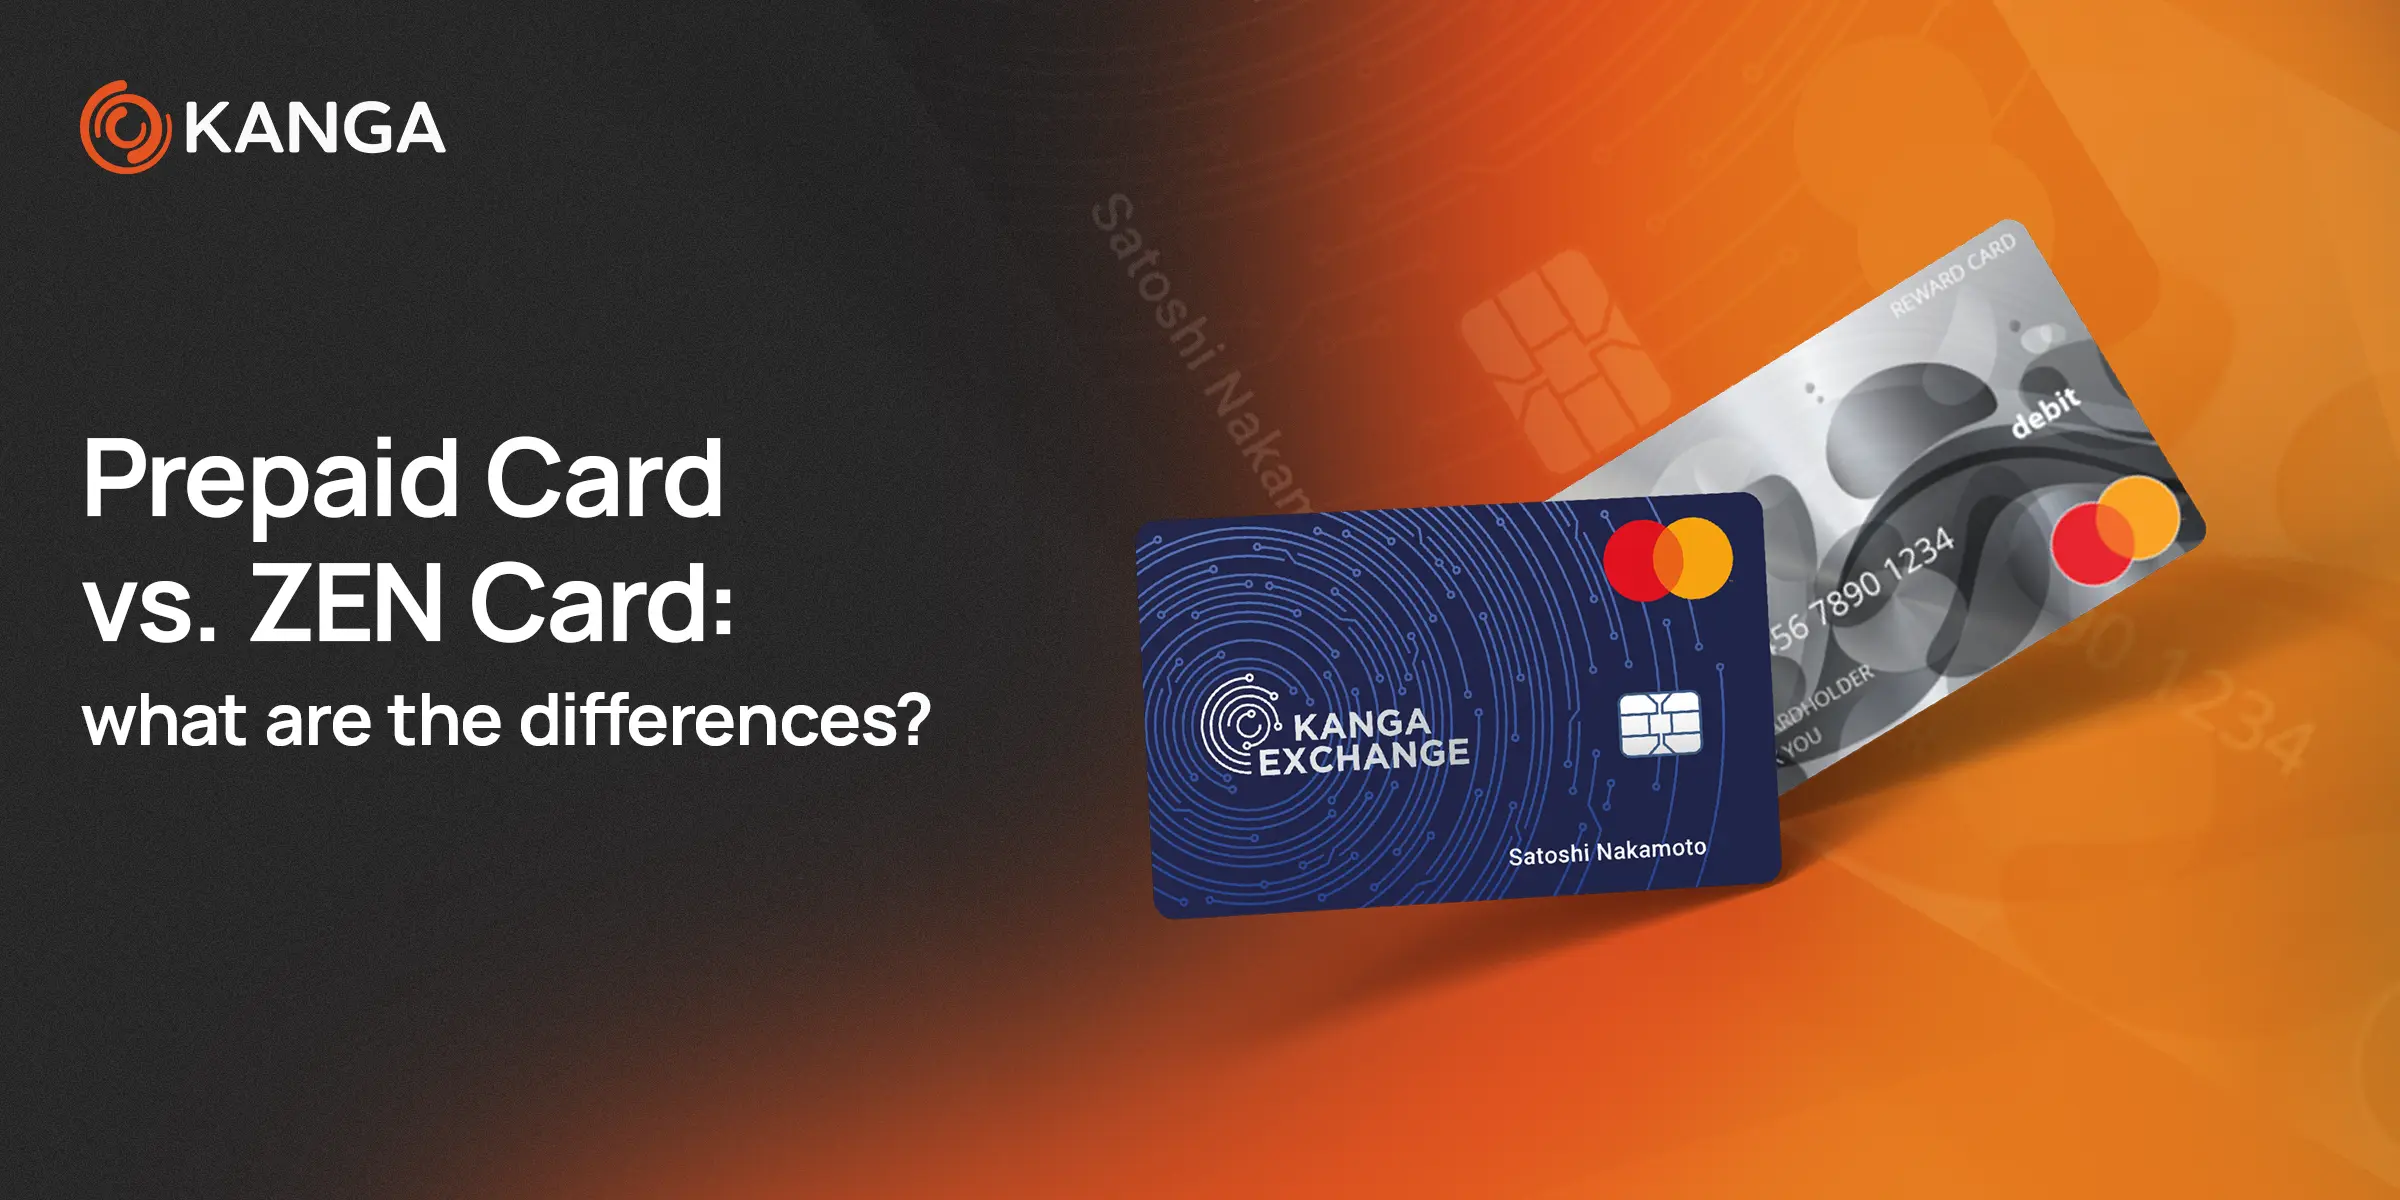 Prepaid Card vs. ZEN Card: what are the differences?